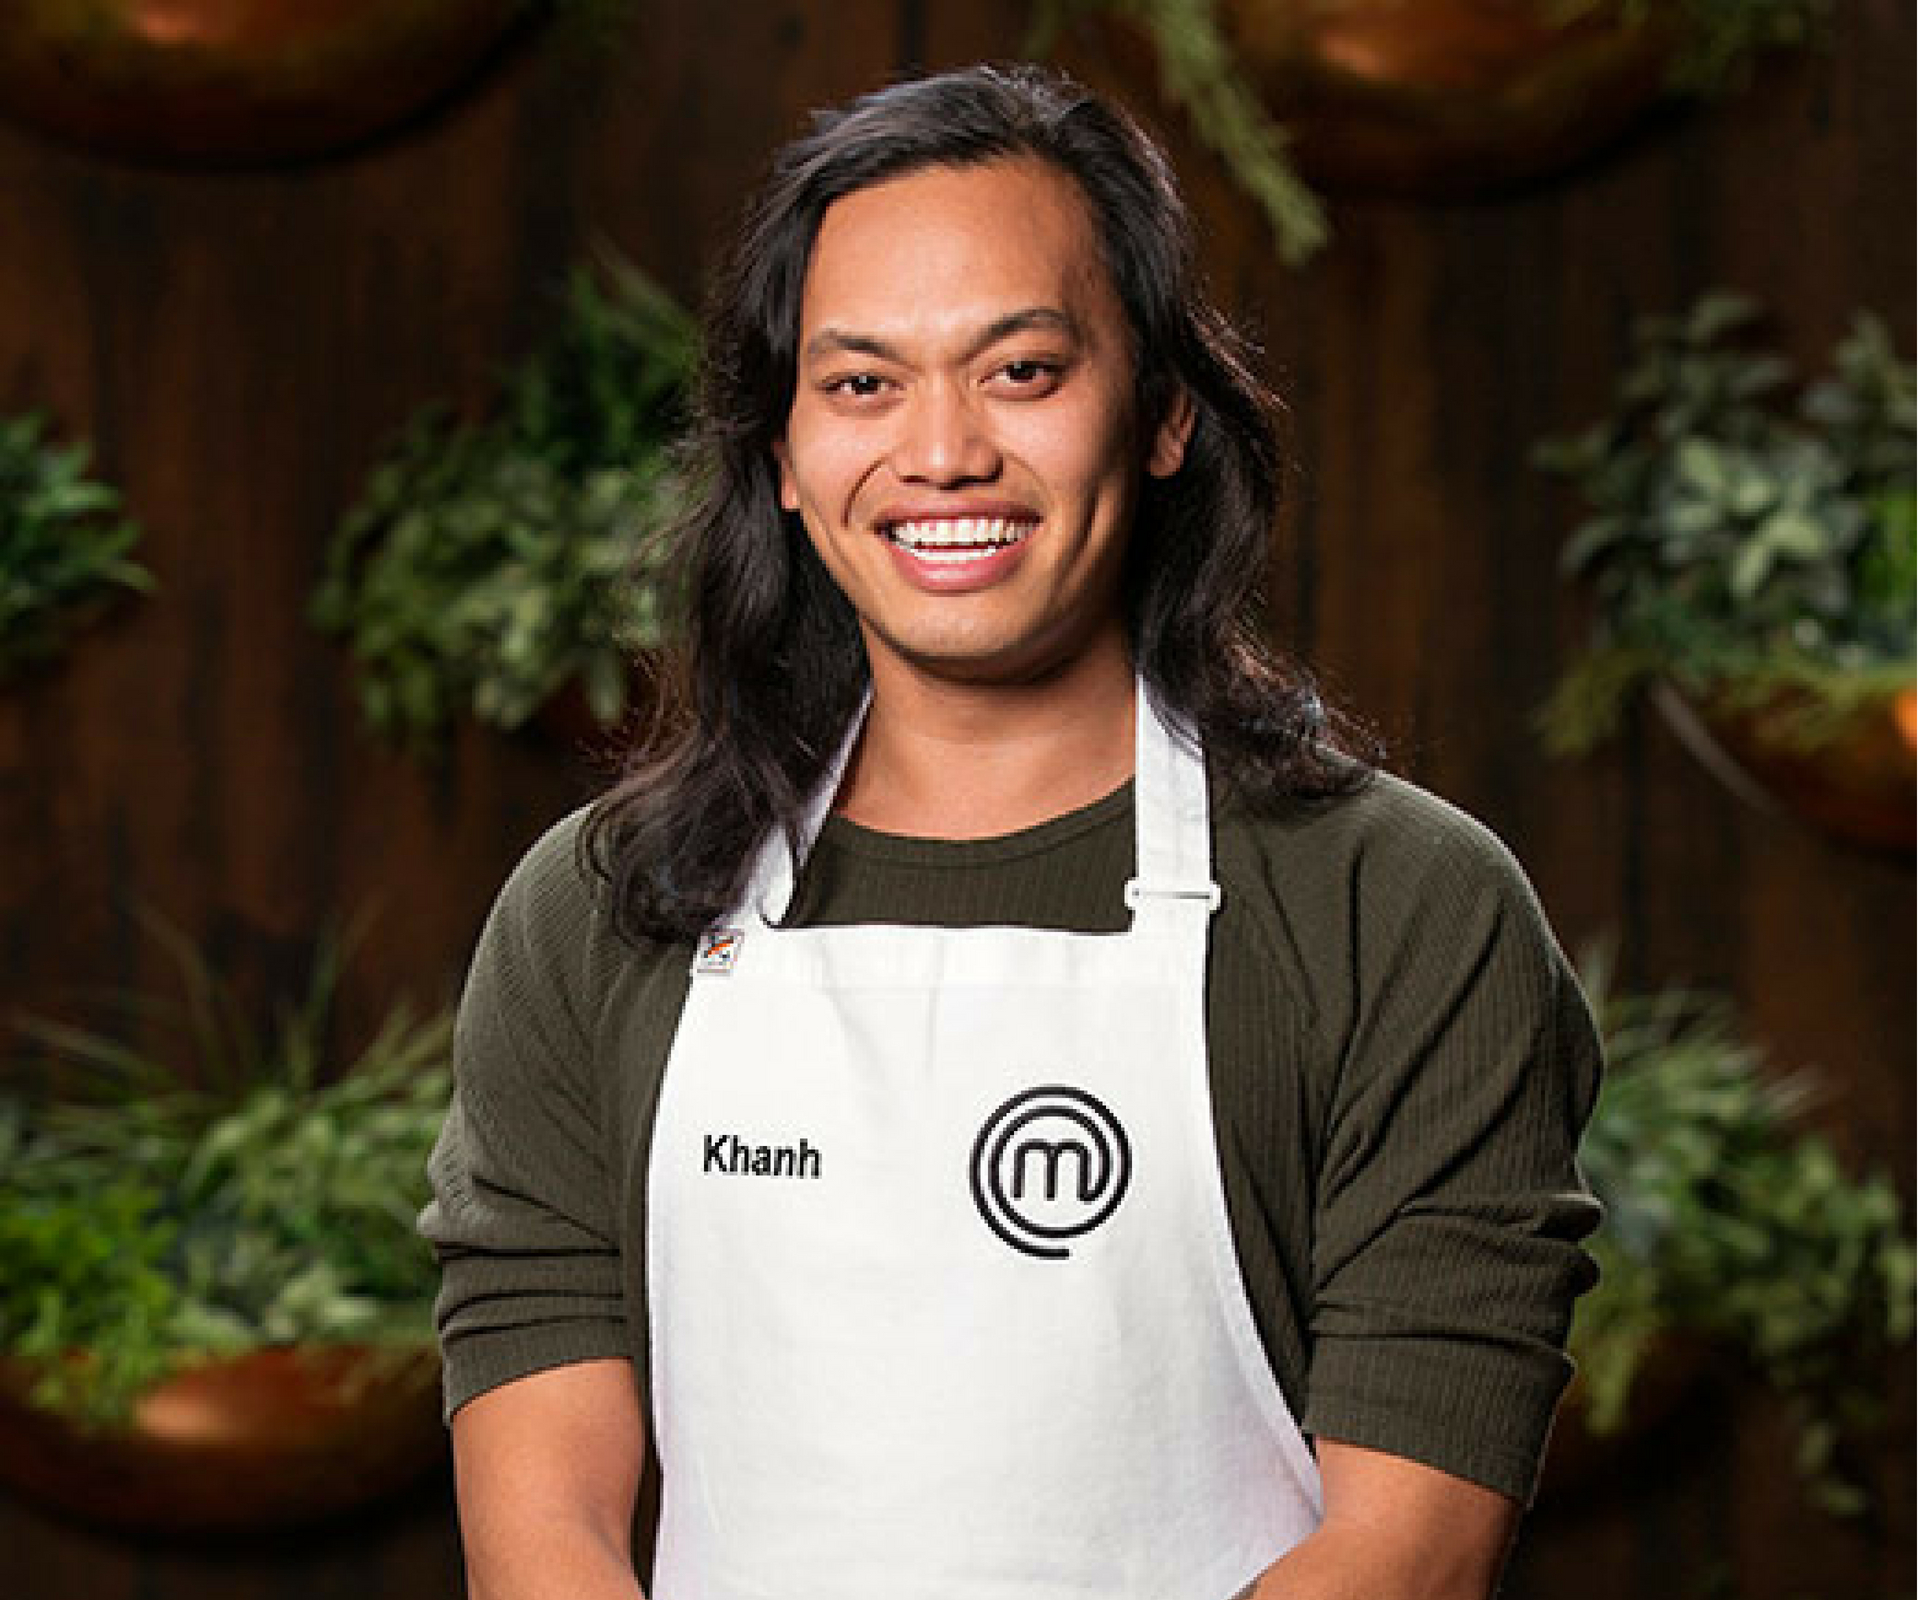 Masterchef’s Khanh Ong: From partying to pastry!